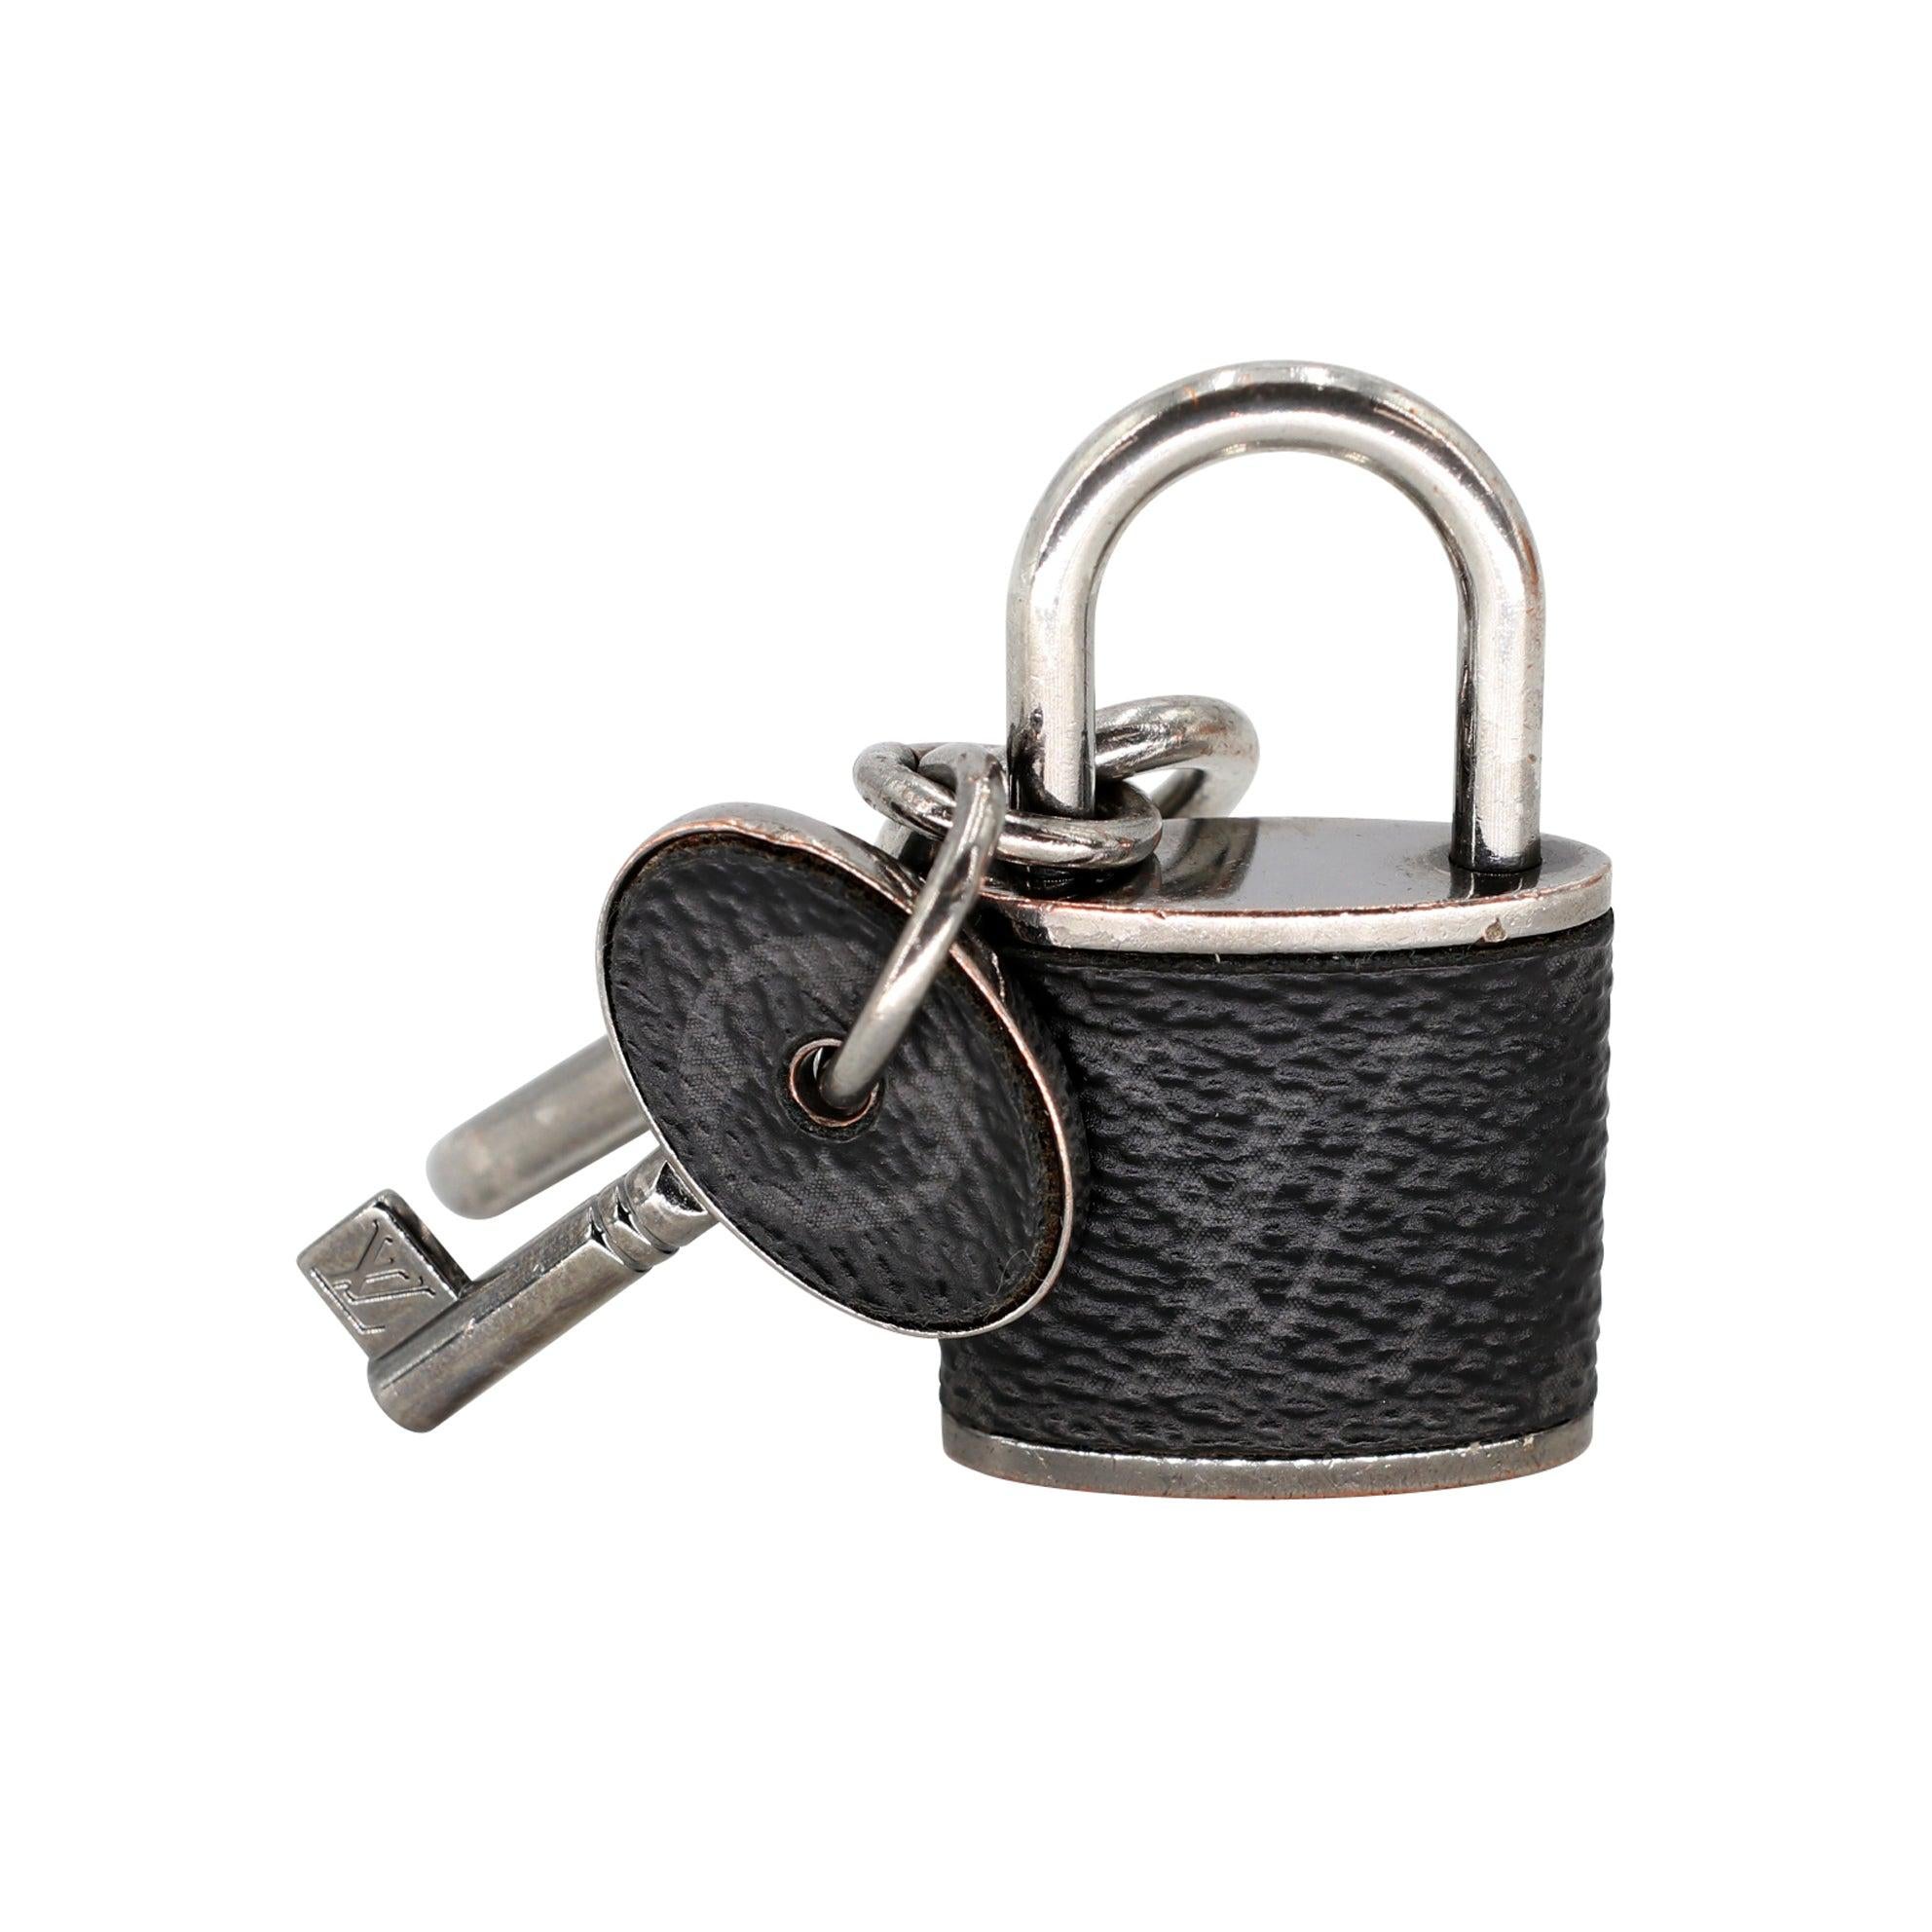 Limited Edition Louis Vuitton Lock & Key. The Lock includes the iconic Monogram pattern, adding a subtle texture and embodying Louis Vuitton's exceptional craftsmanship. The bold and voluminous design is suitable for both women and men. This is a